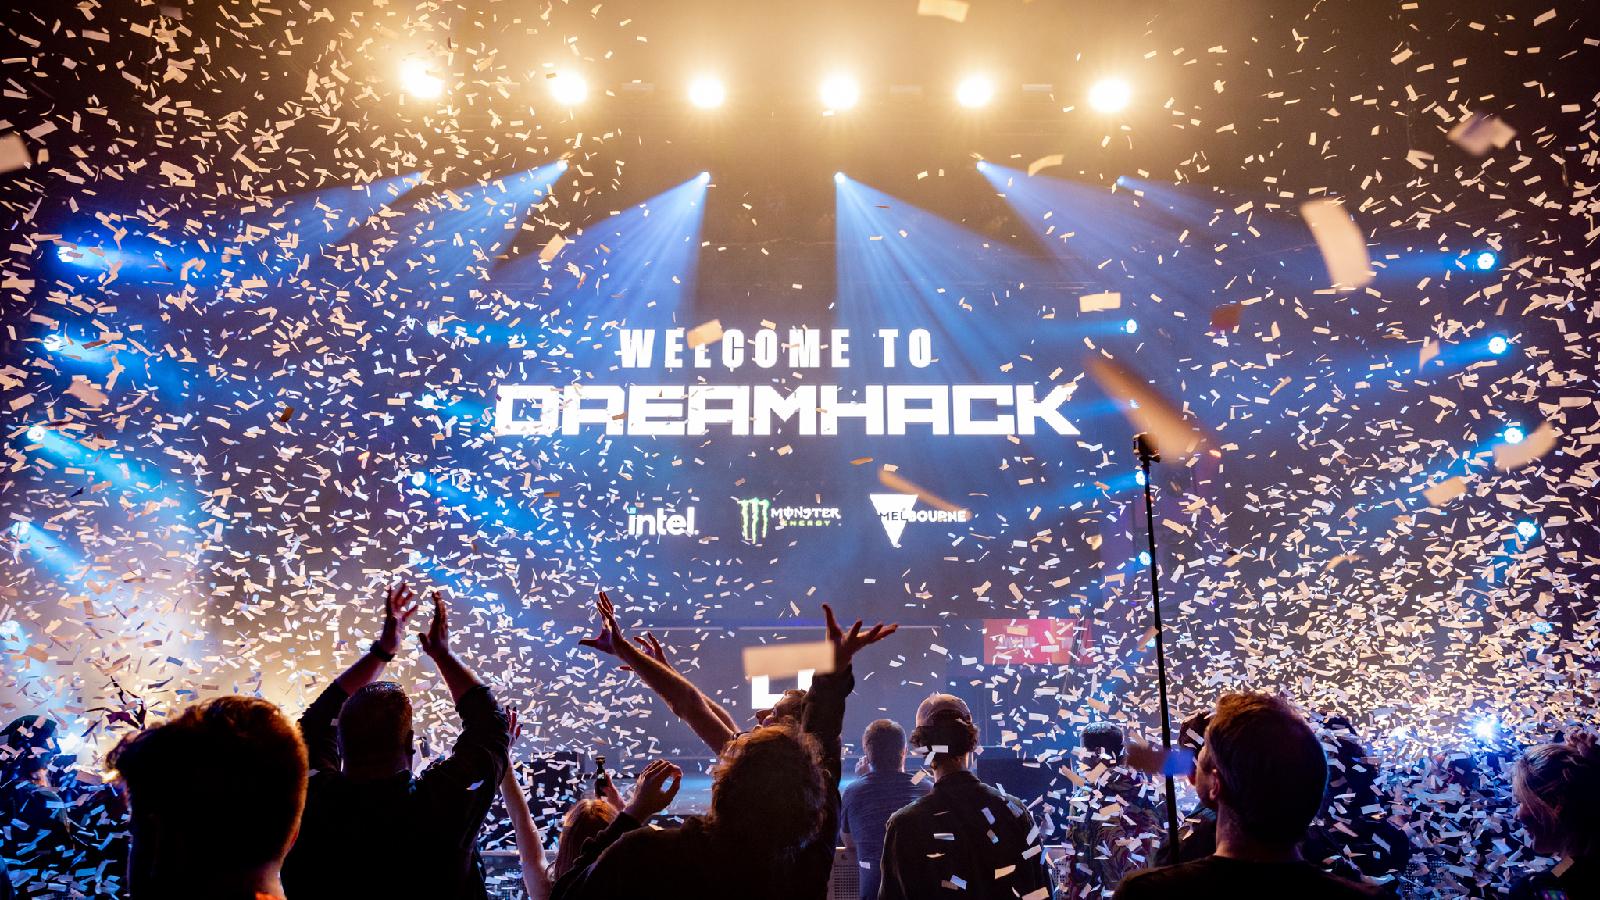 DreamHack Melbourne stage image